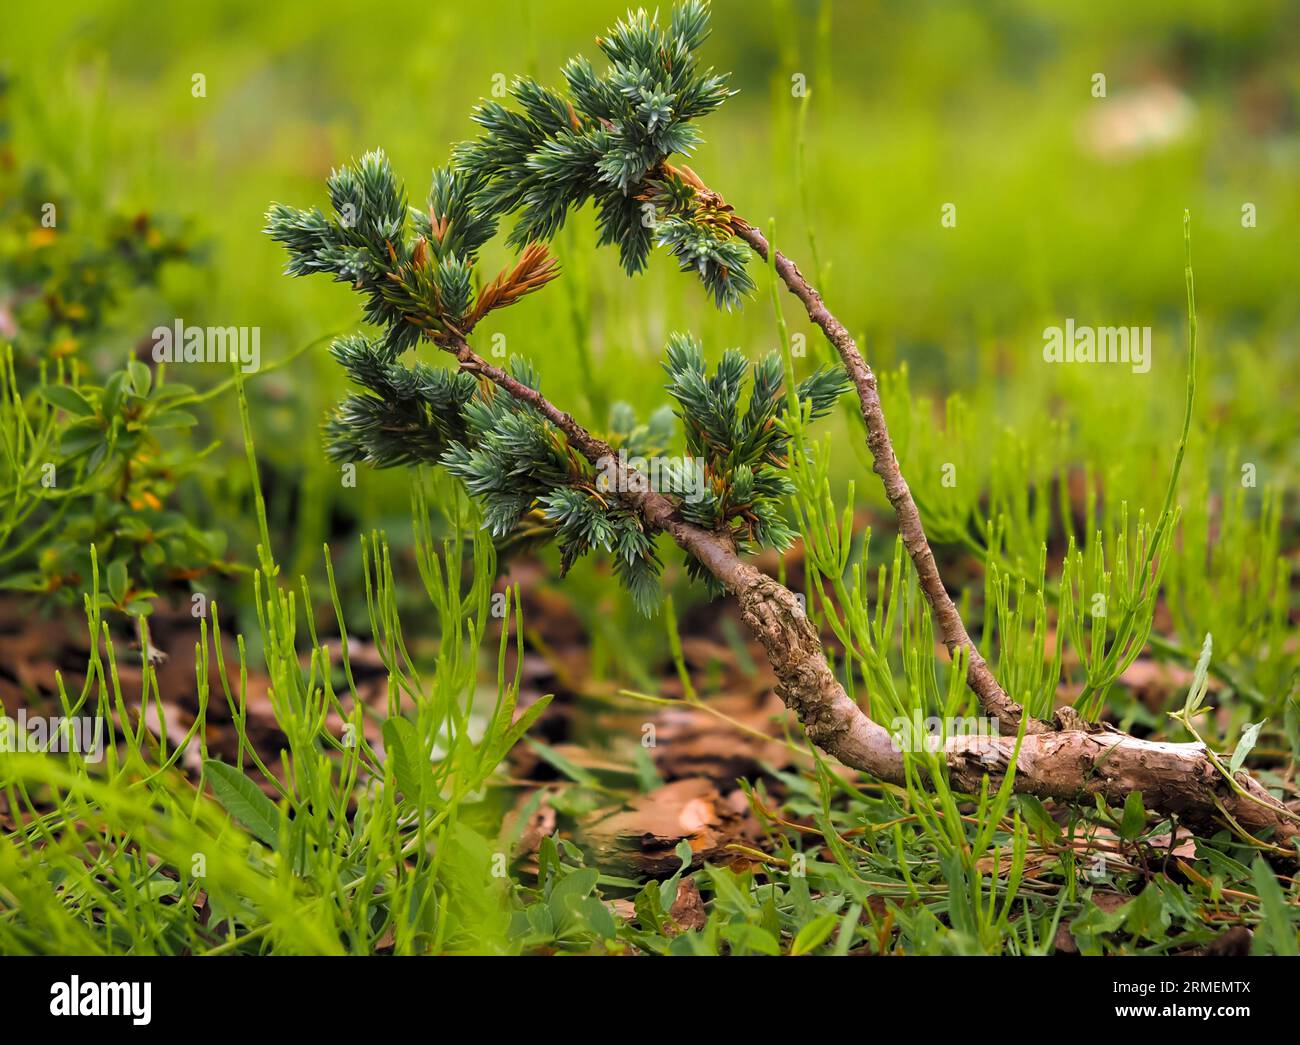 Pinus mugo Turra, mountain pine, blackhorse, dwarf mountain pine variety in natural habitat, young twisted shoot, on a blurred background close-up Stock Photo